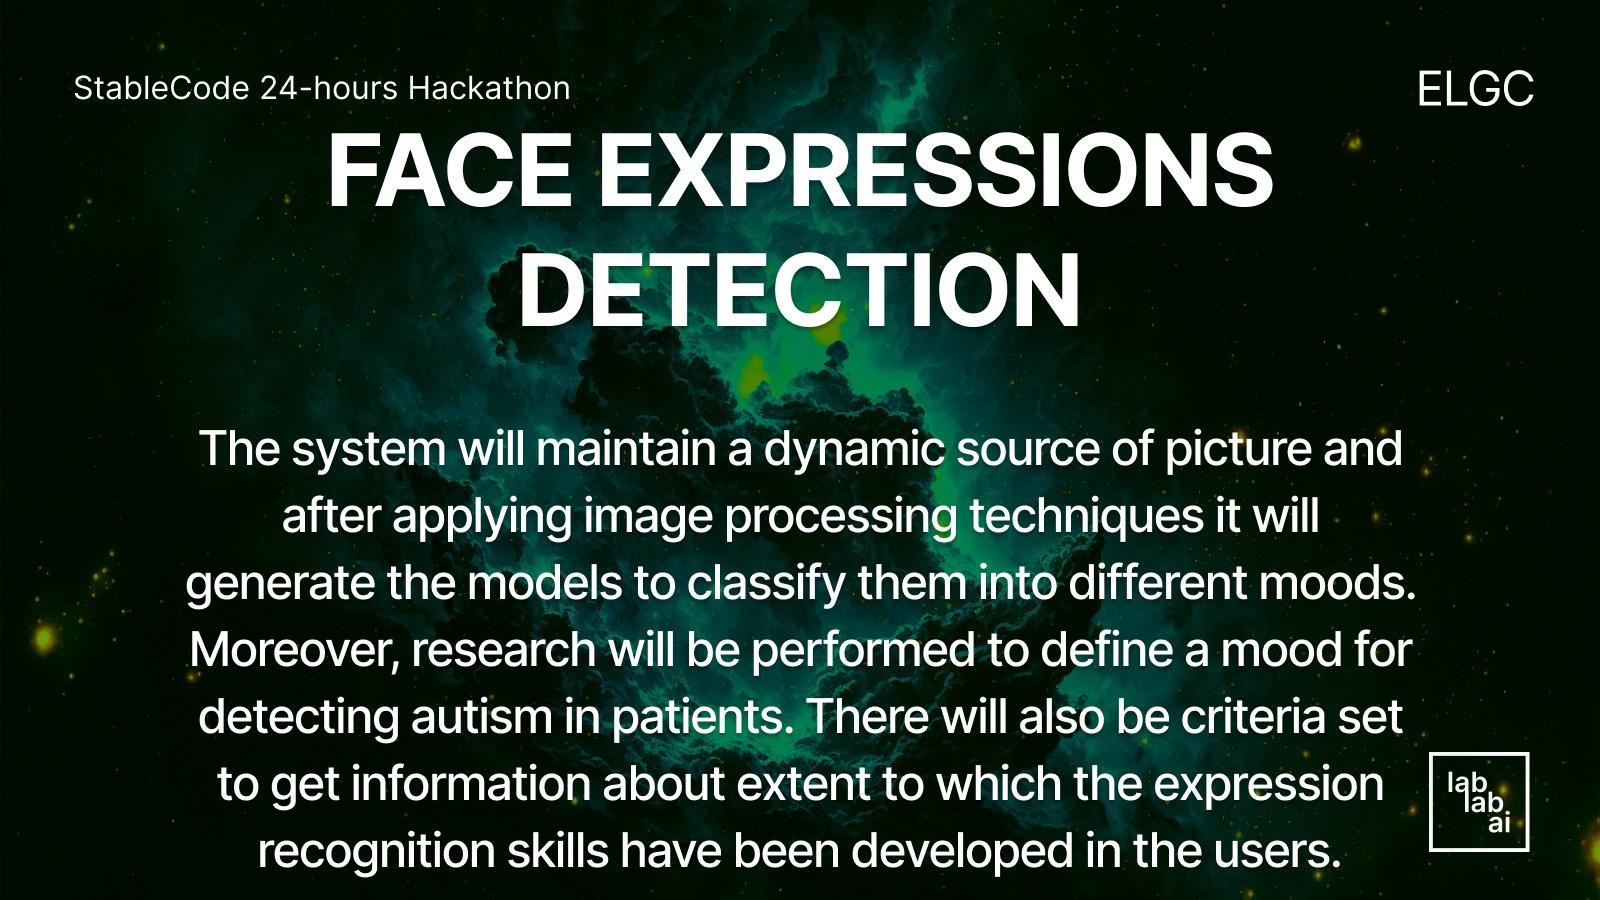 FACE EXPRESSIONS DETECTION